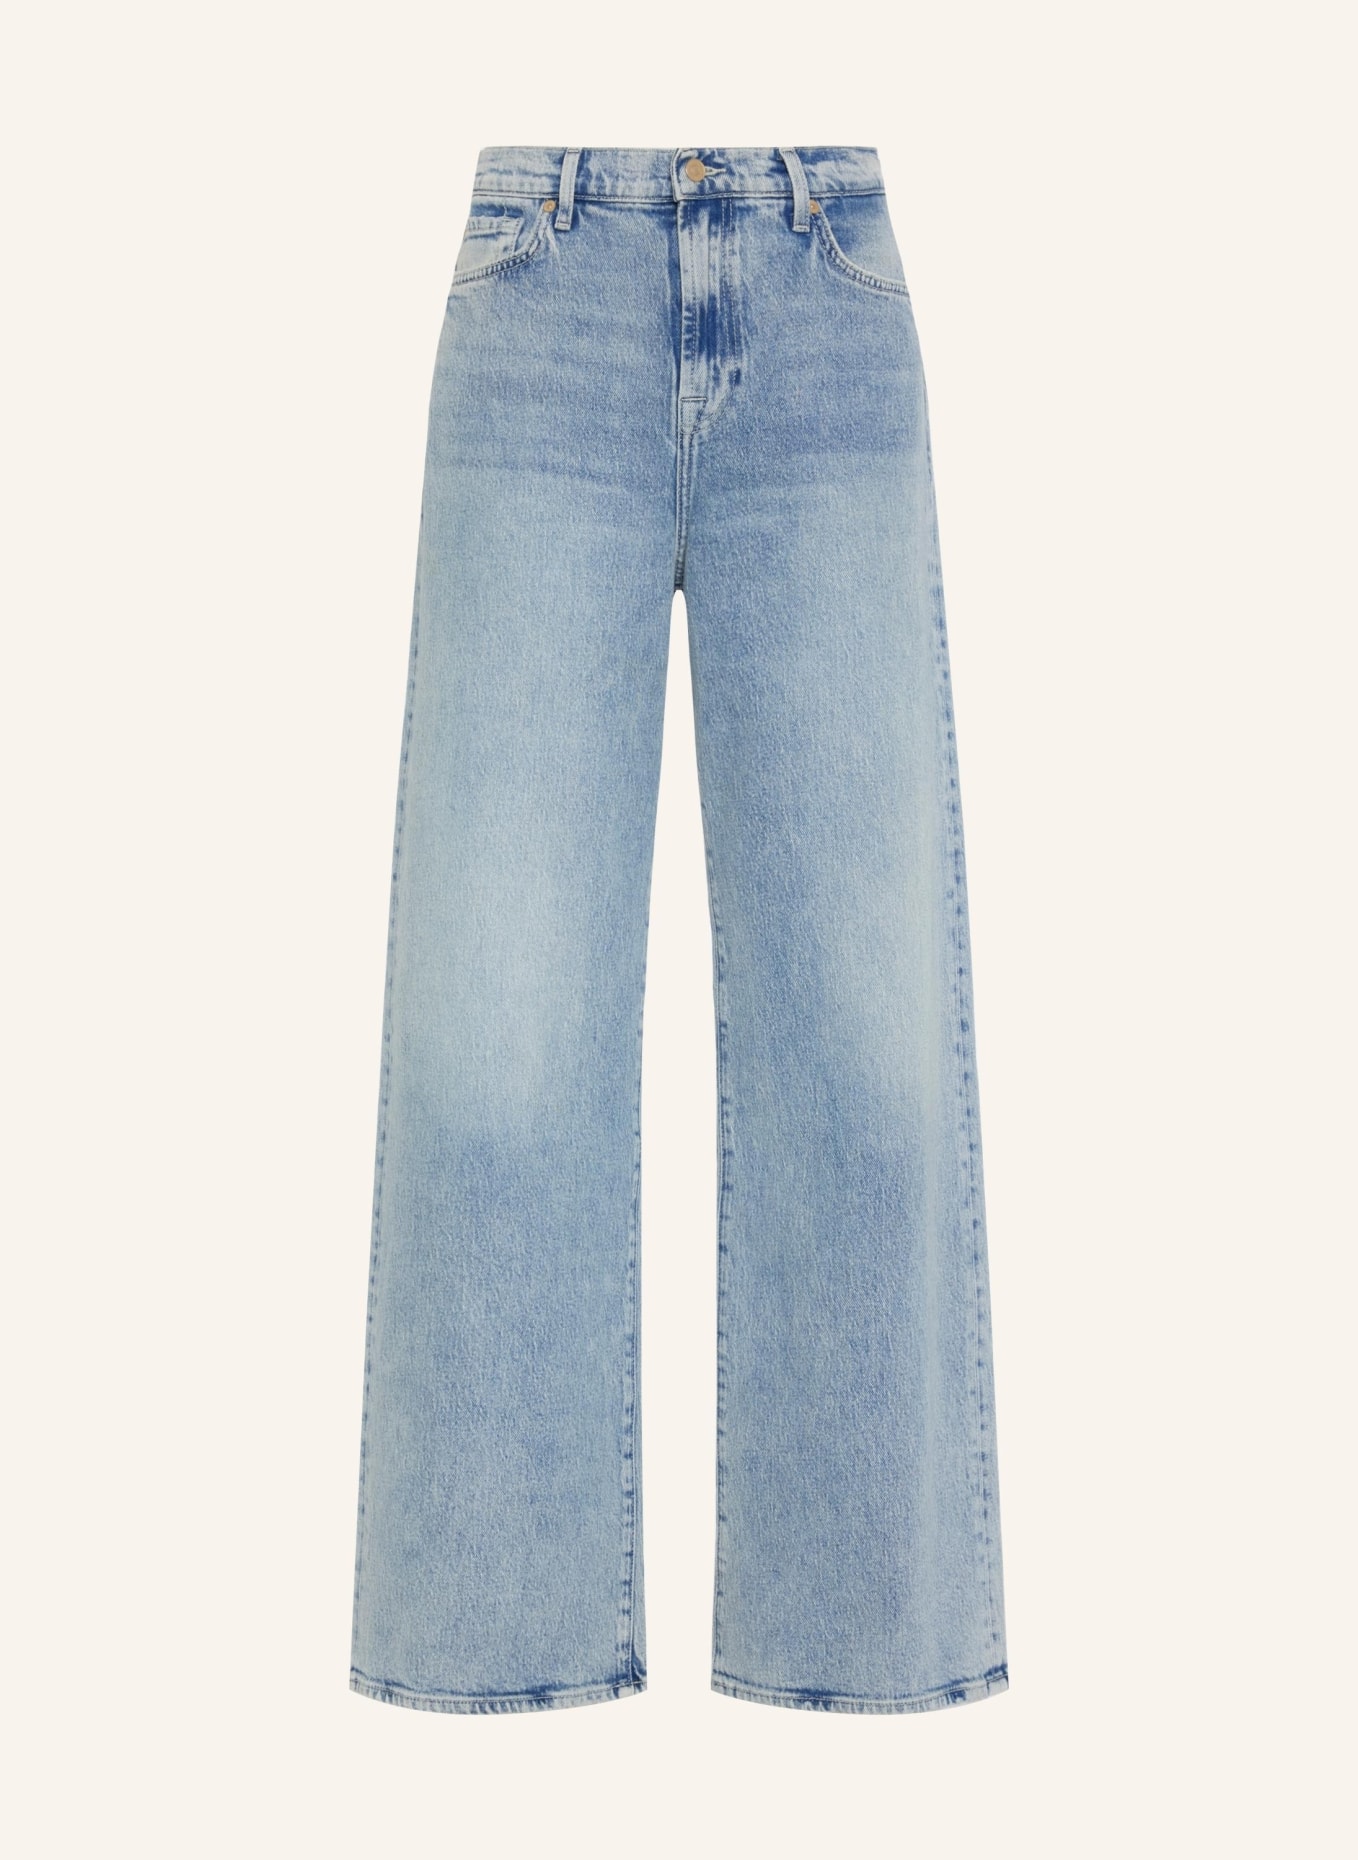 7 for all mankind Jeans SCOUT Bootcut fit, Farbe: BLAU (Bild 1)